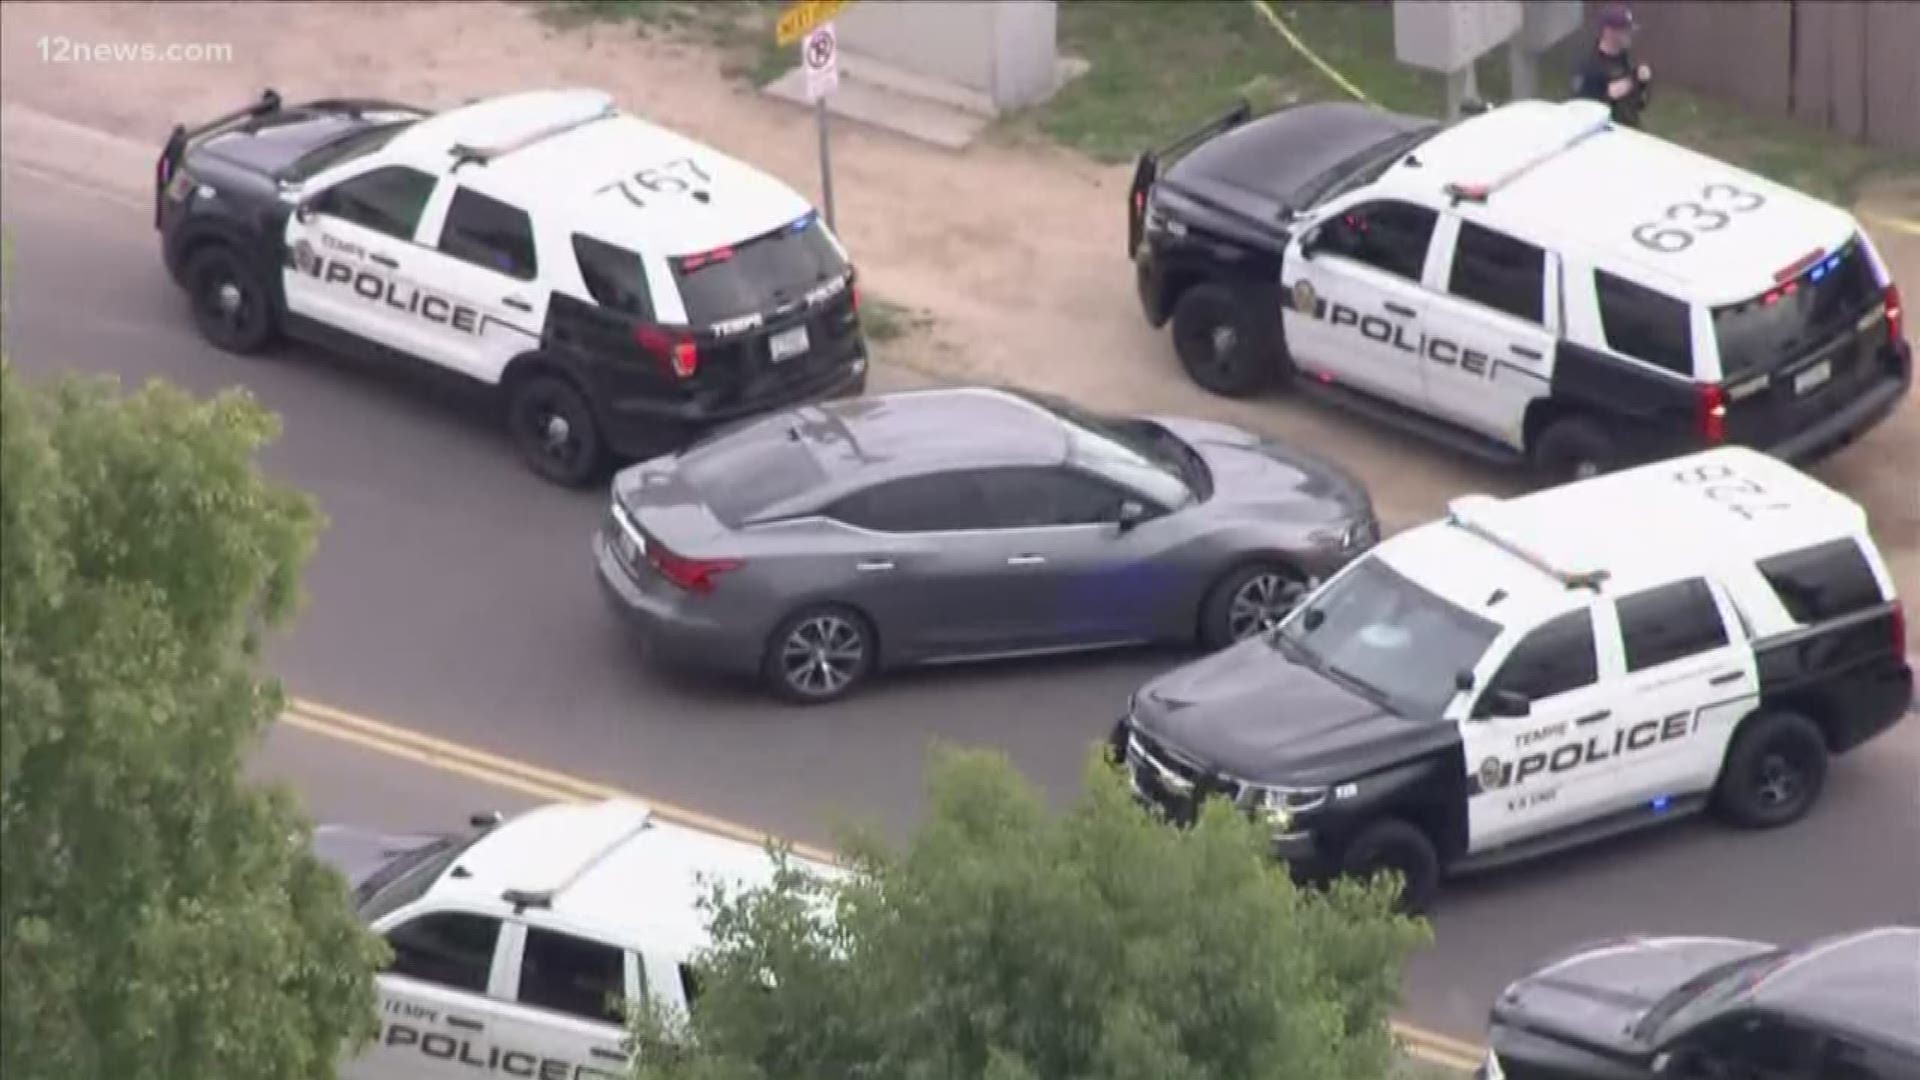 It's the fourth officer-involved shooting in the first two weeks of 2019 for Maricopa County. Tempe Police say an armed suspect was shot and killed after the suspect pointed a gun towards the officer.